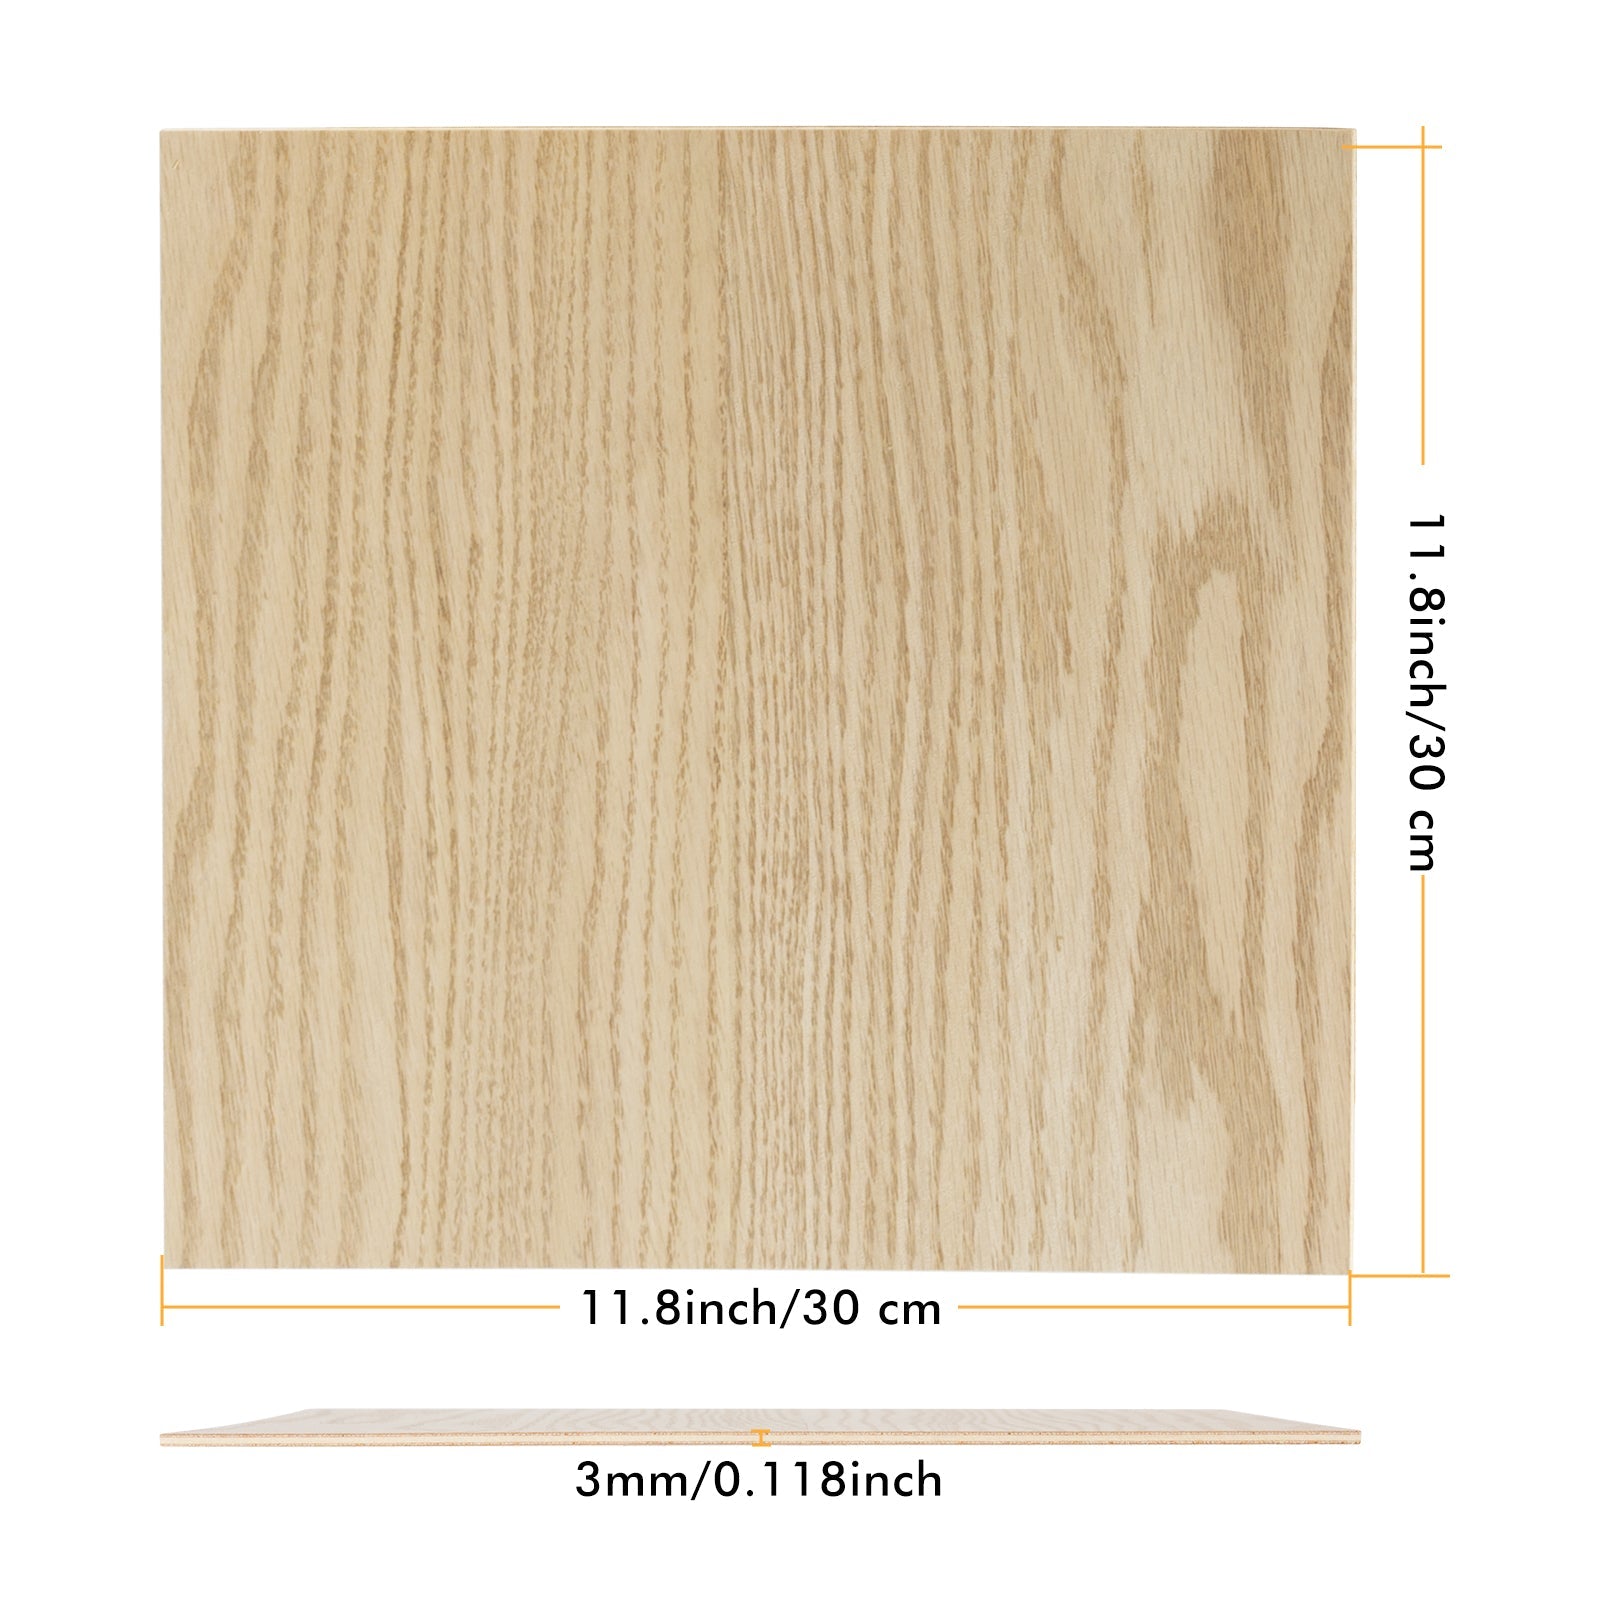 6pcs Red Oak Plywood 1/8"x12" x 12" Bubinga Unfinished Wood for Crafts Laser Cutting Engraving - CREATORALLY